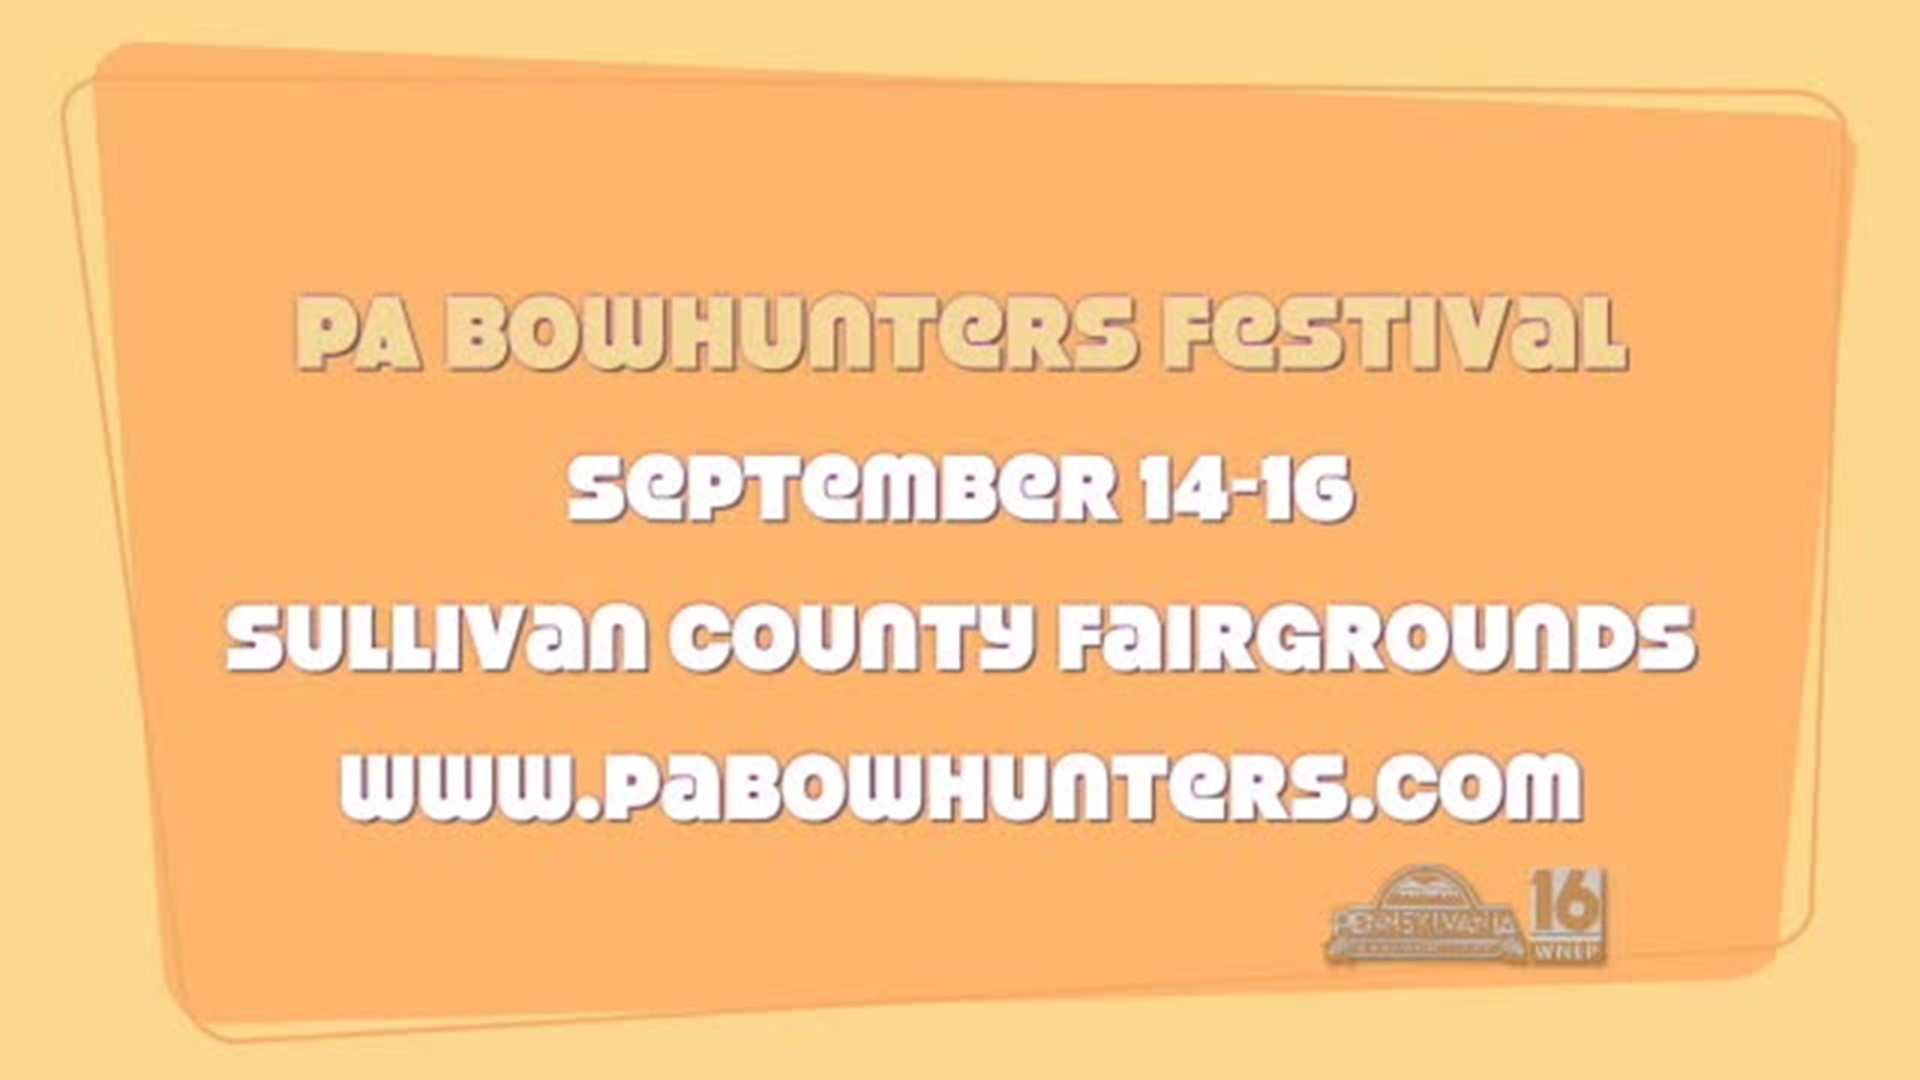 PA Bowhunters Festival Product Giveaway